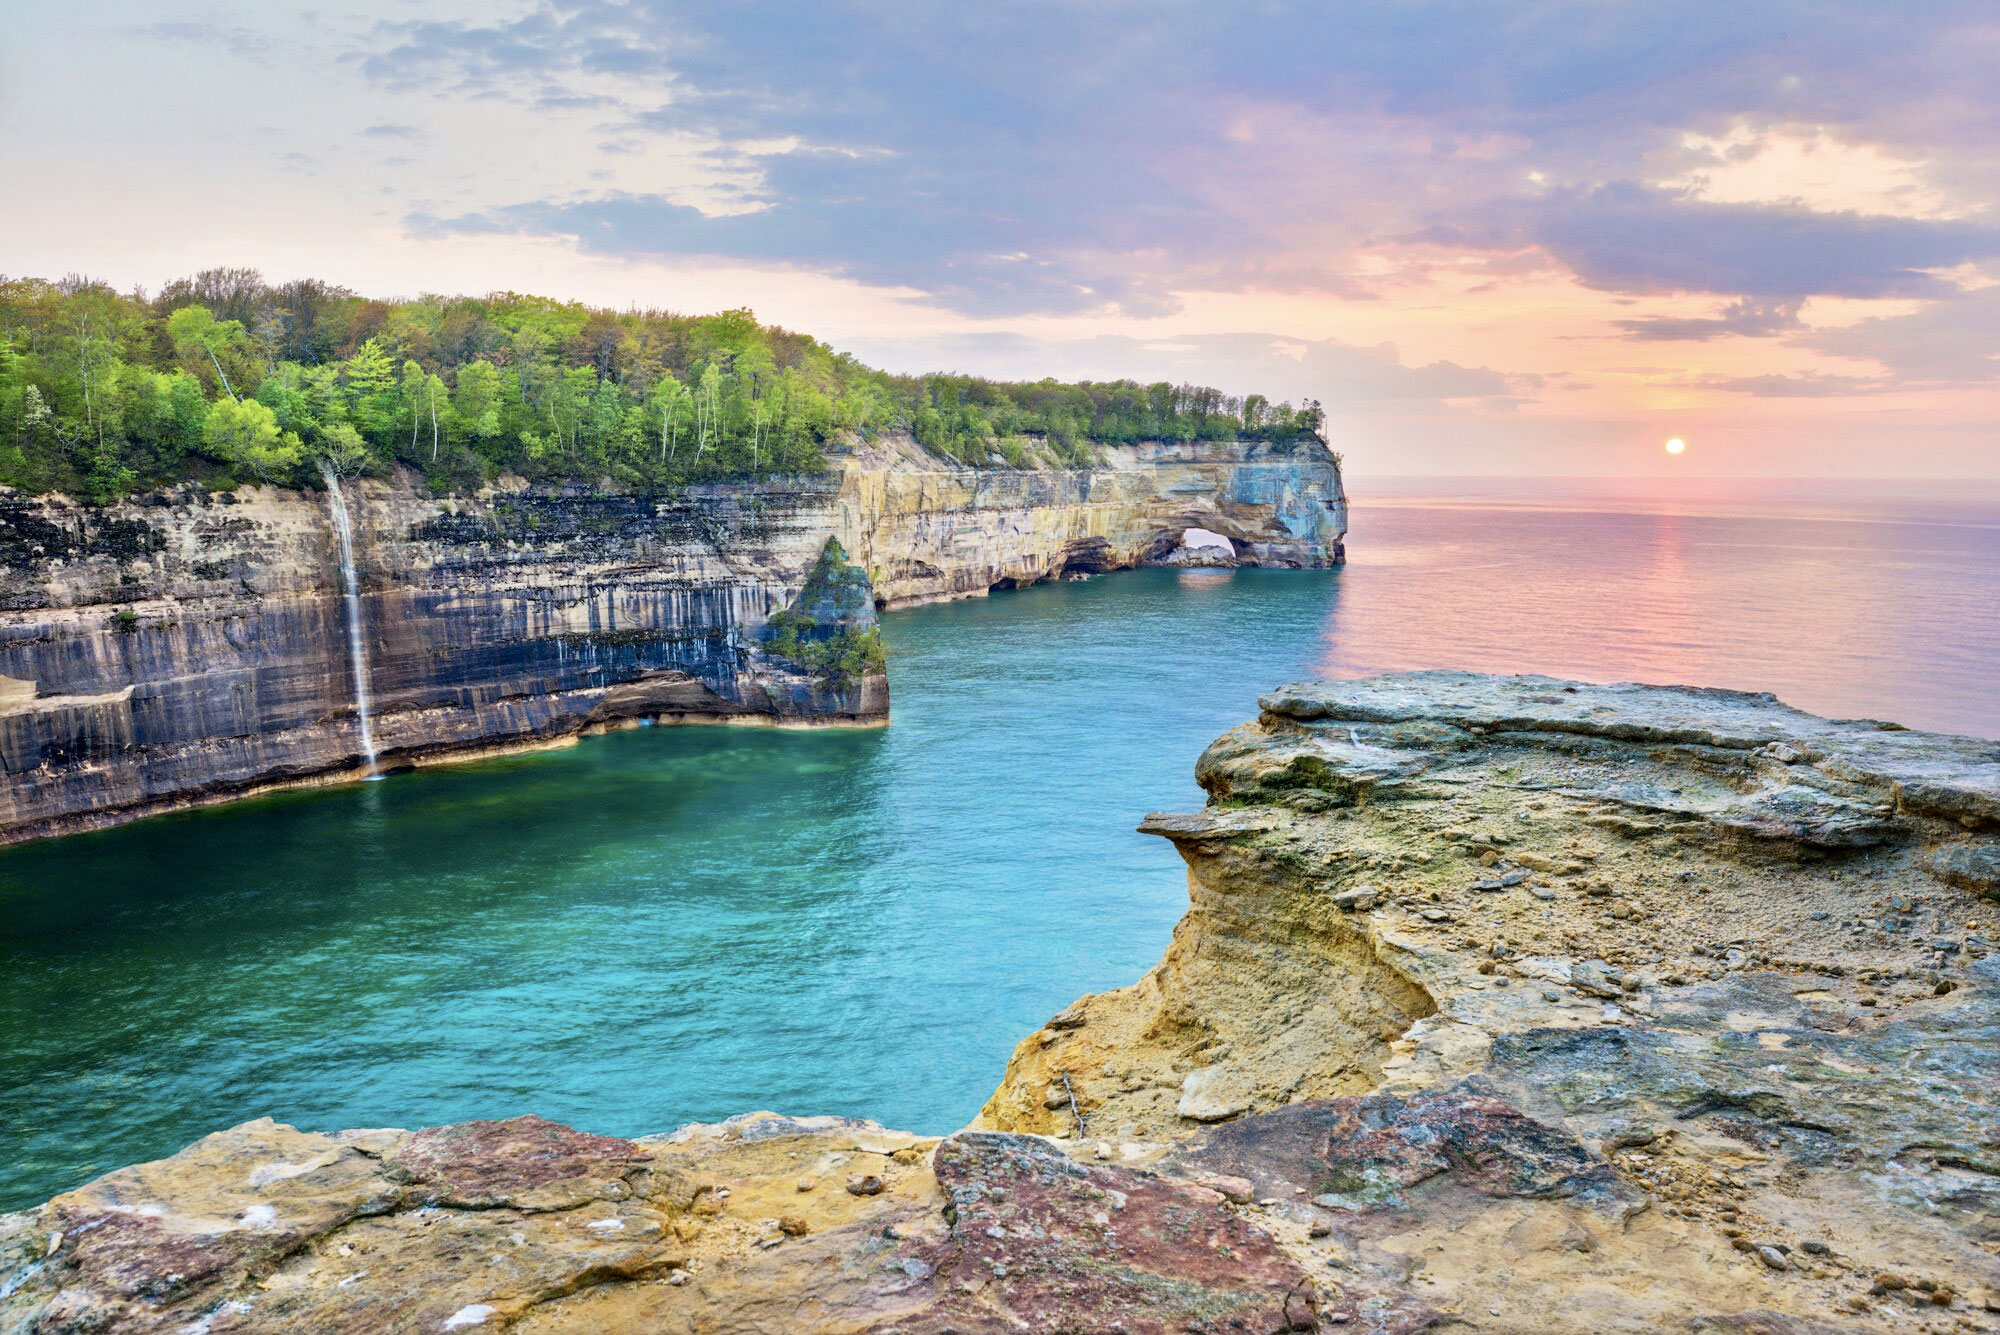 Pristine beaches, waterfalls and trails in the Pictured Rocks